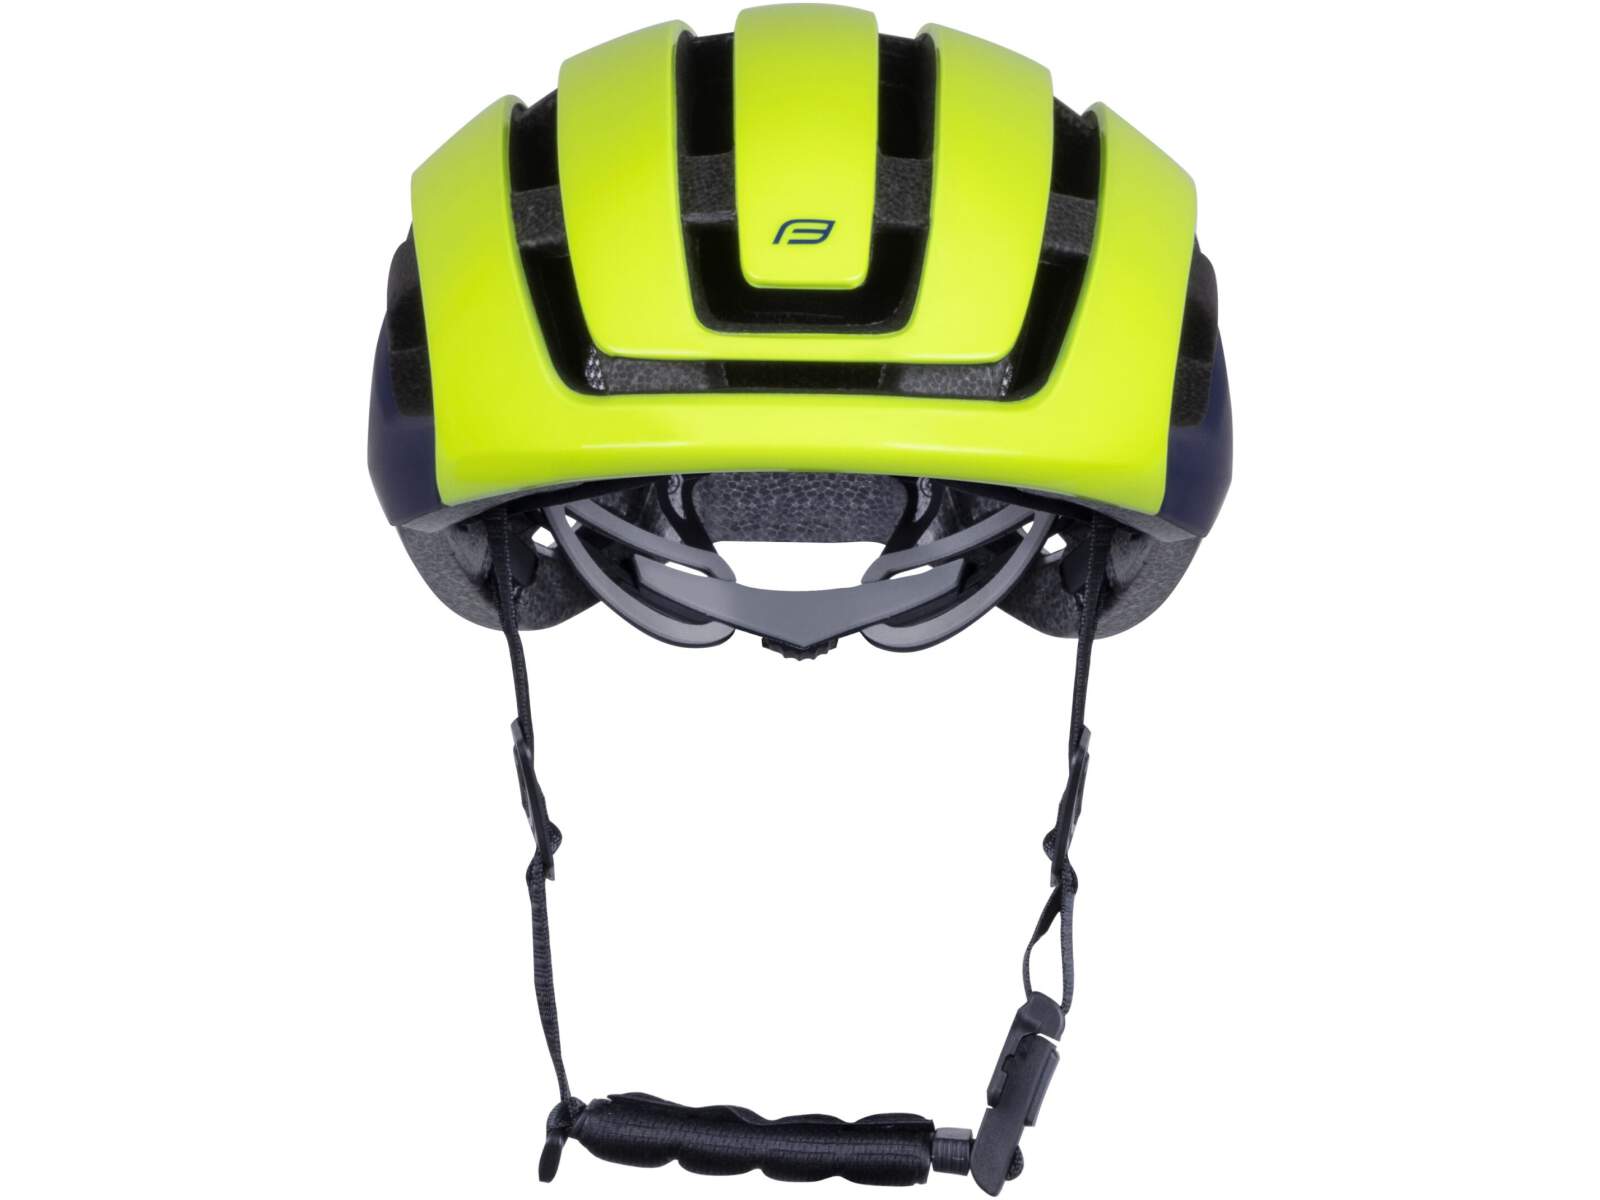 Kask rowerowy FORCE NEO